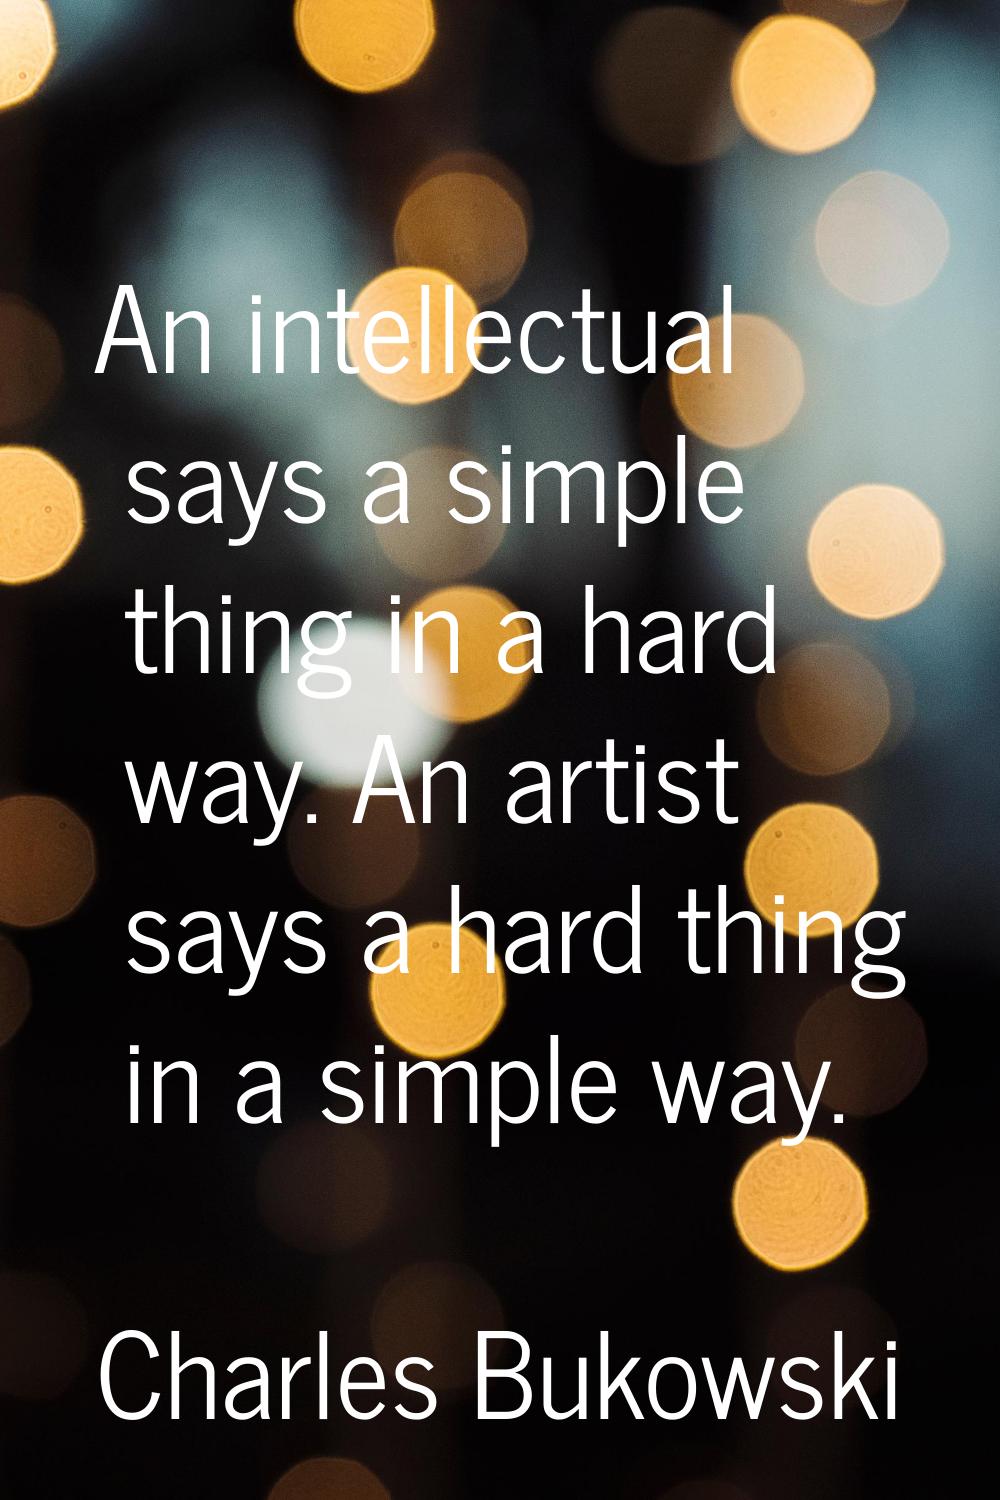 An intellectual says a simple thing in a hard way. An artist says a hard thing in a simple way.